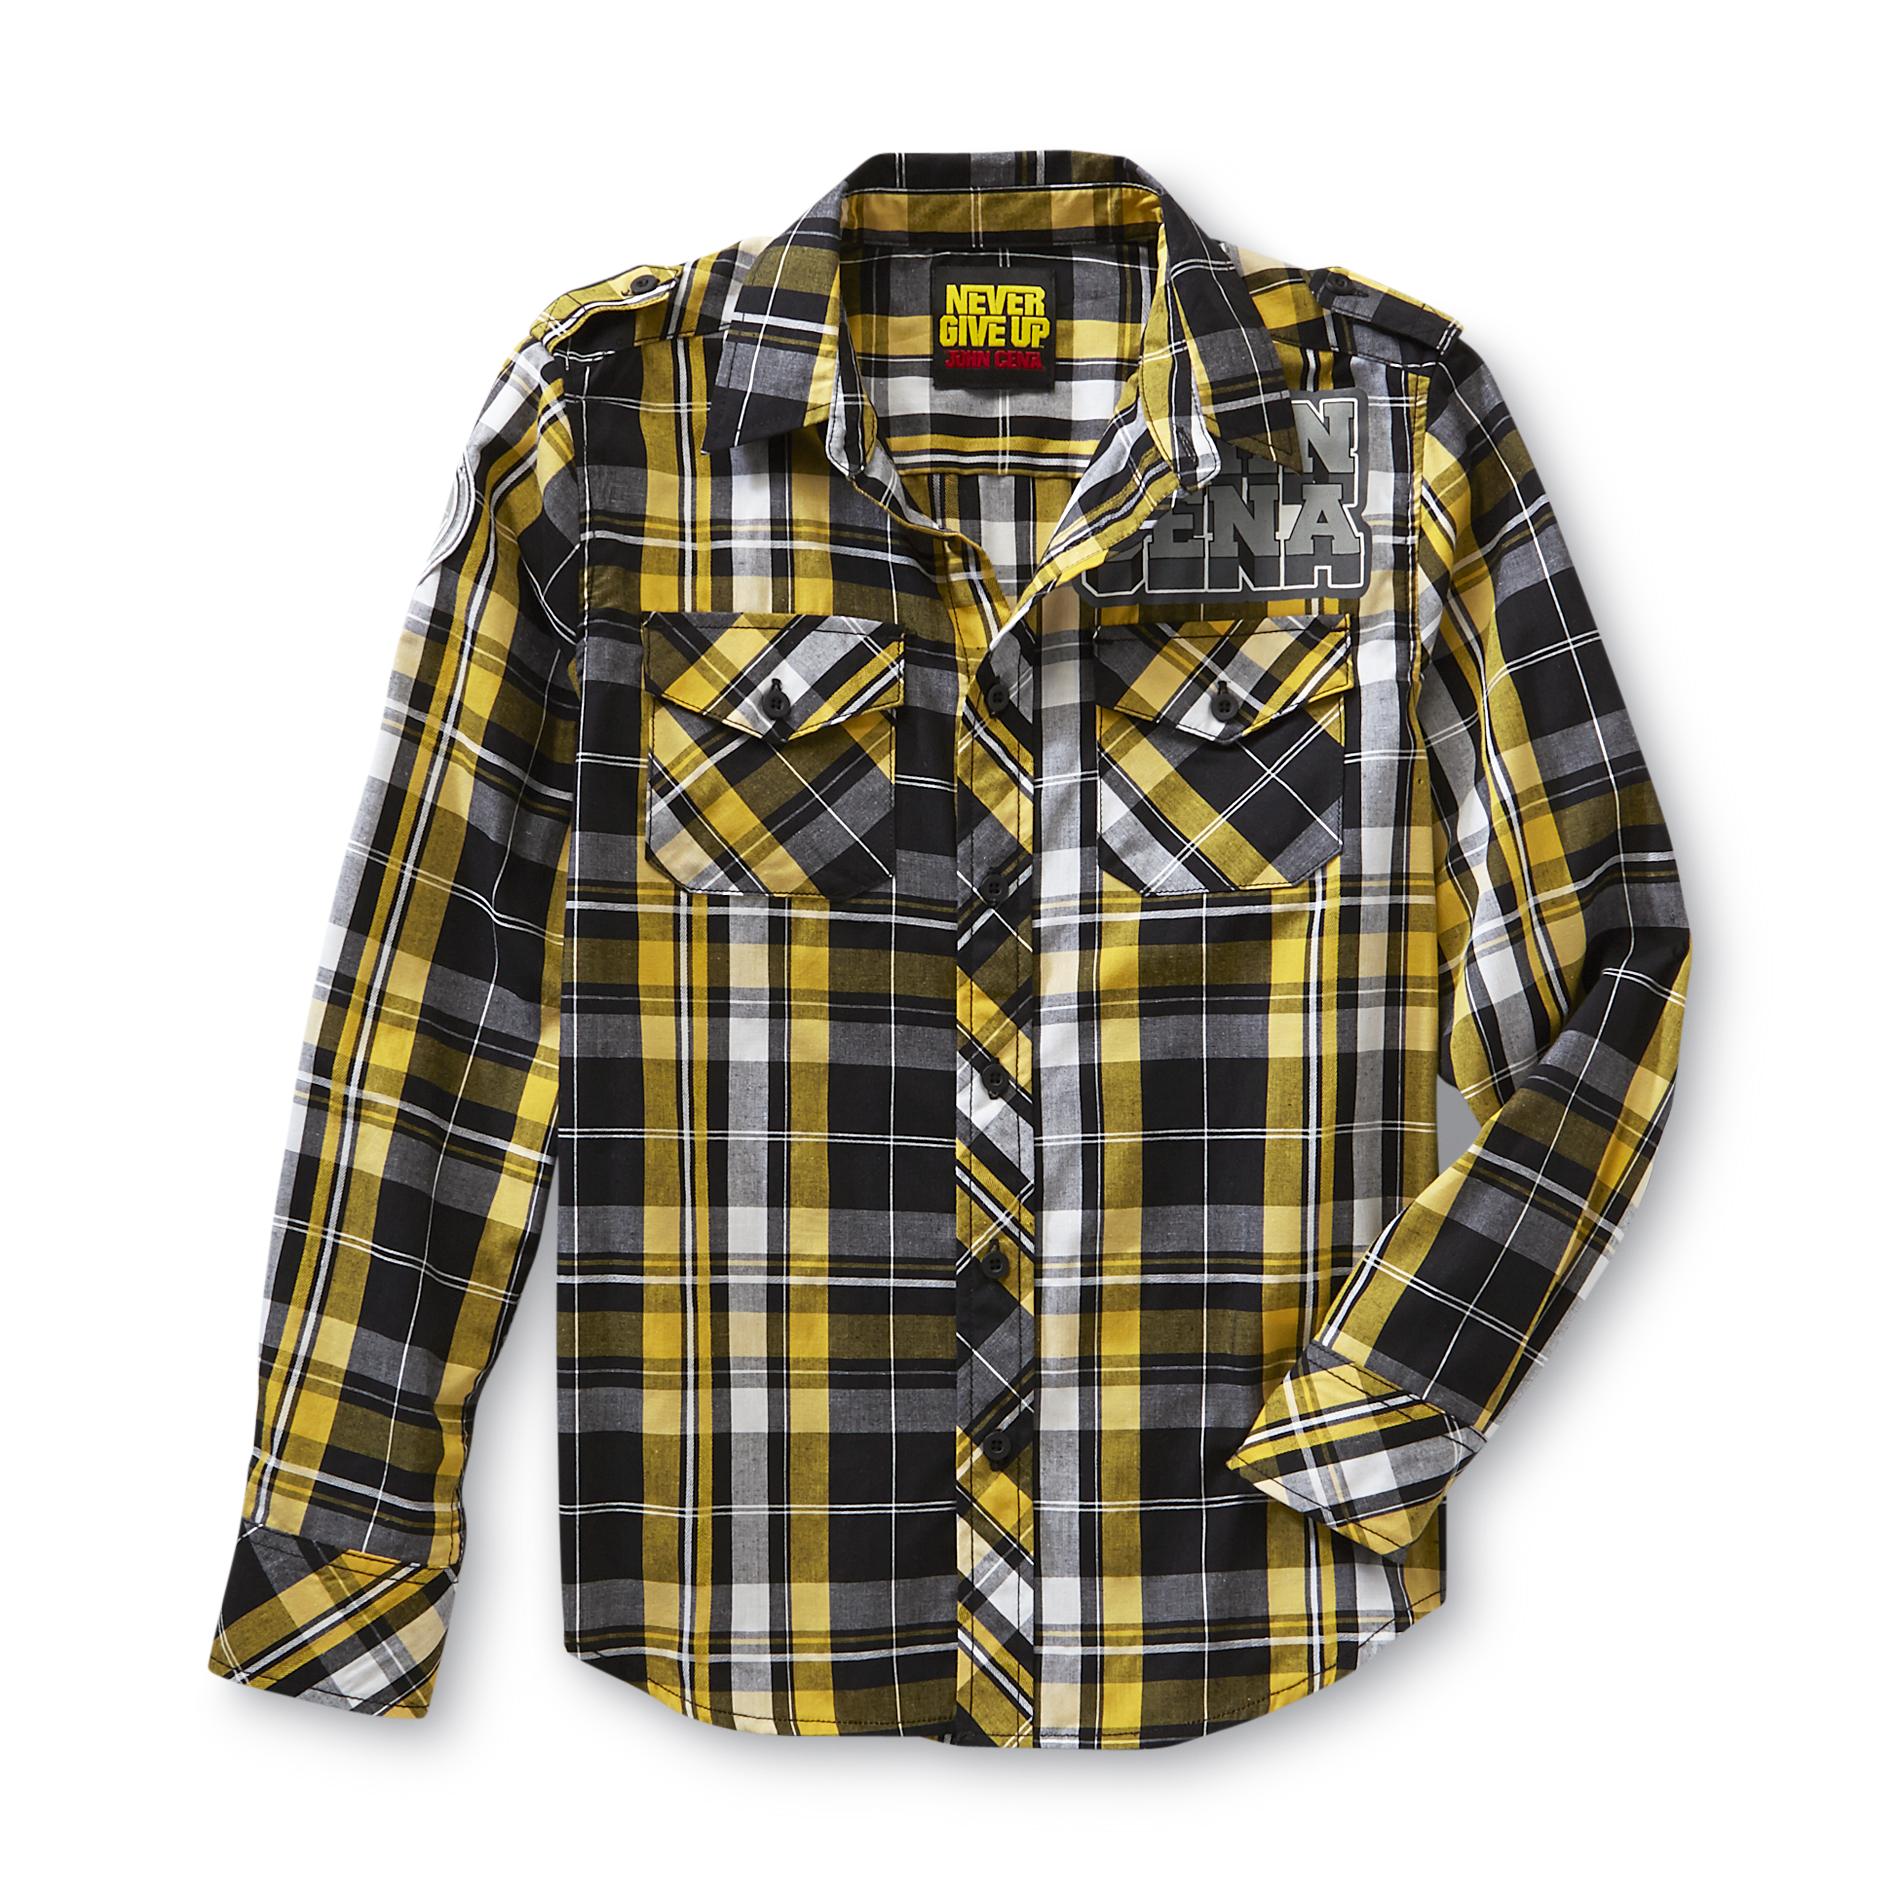 Never Give Up By John Cena Boy's Long-Sleeve Button-Down Shirt - Yellow/Black